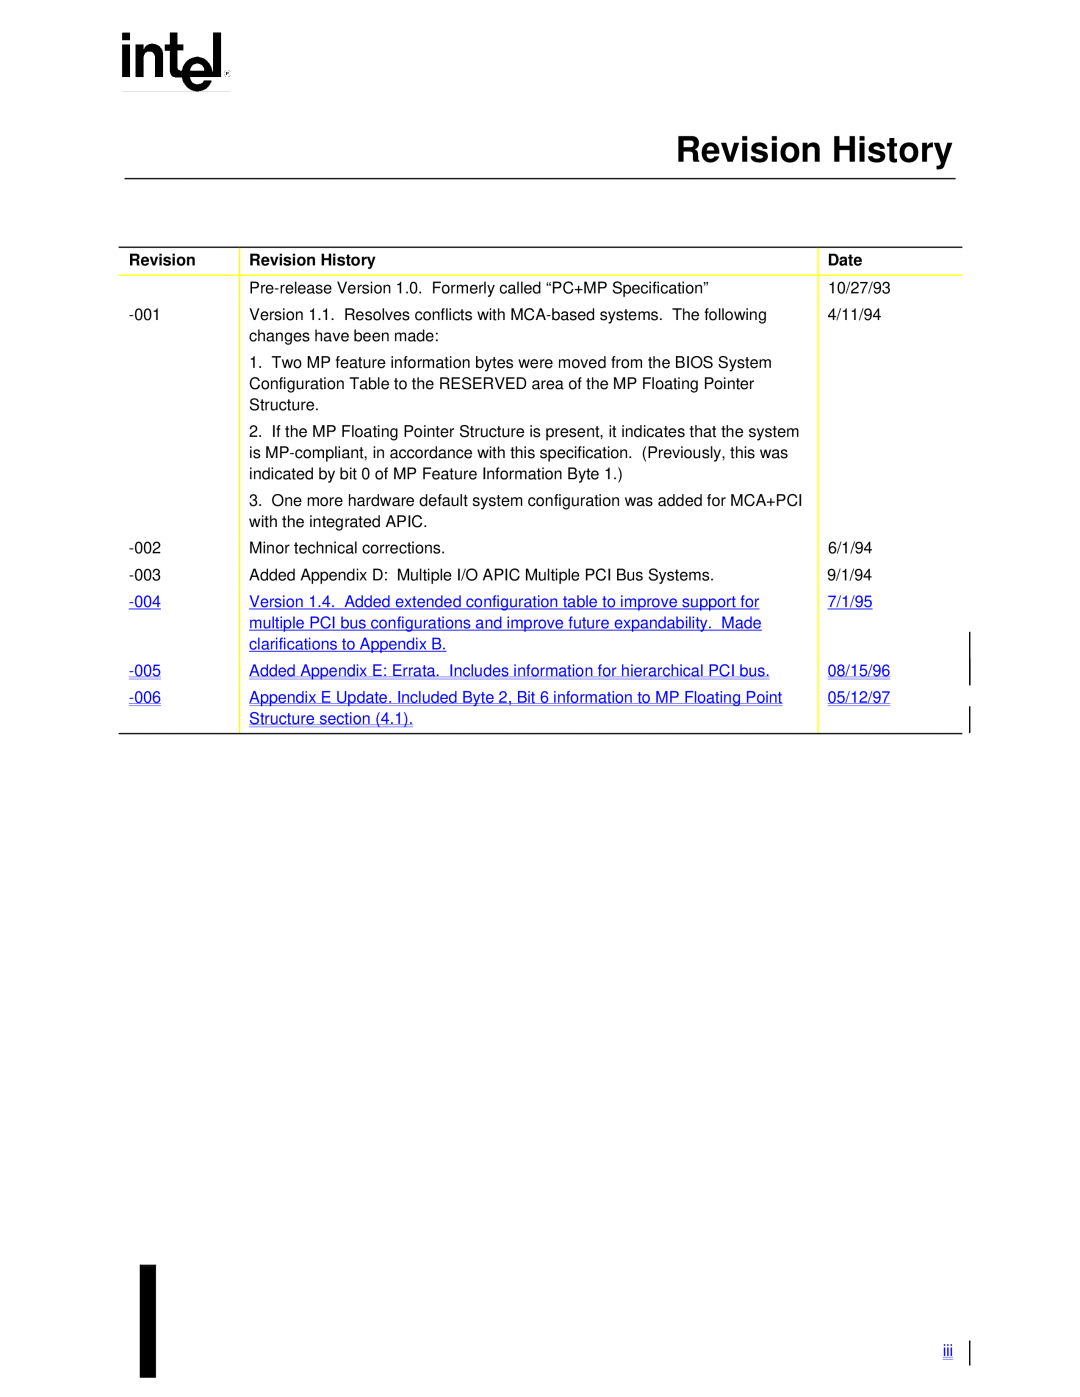 Intel MultiProcessor manual Revision History, Date 